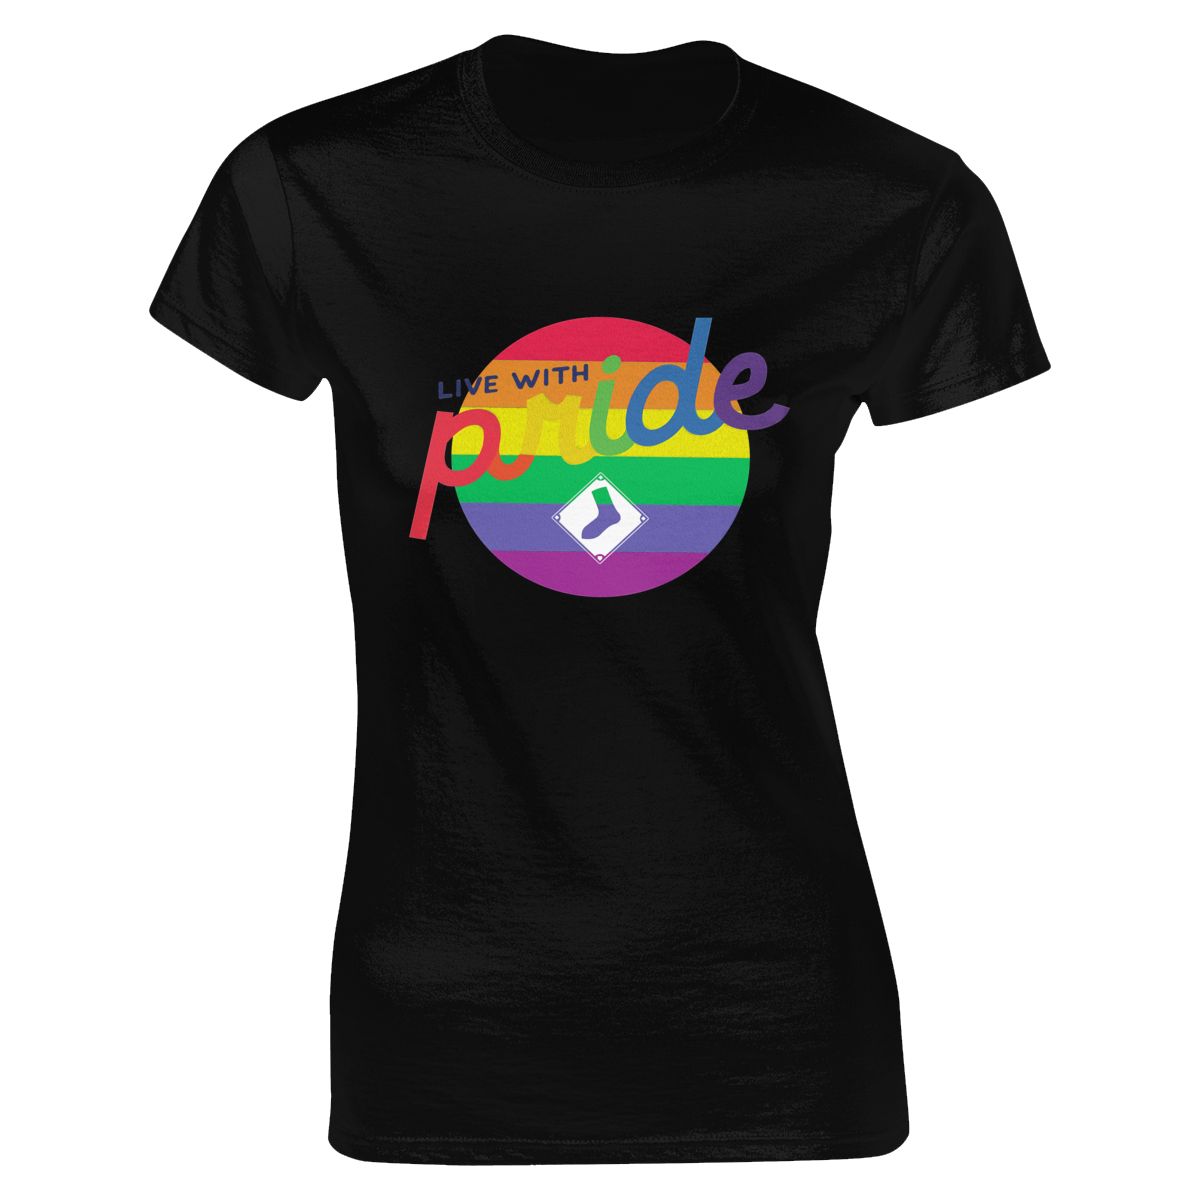 Chicago White Sox Round LGBT Lettering Women's Classic-Fit T-Shirt